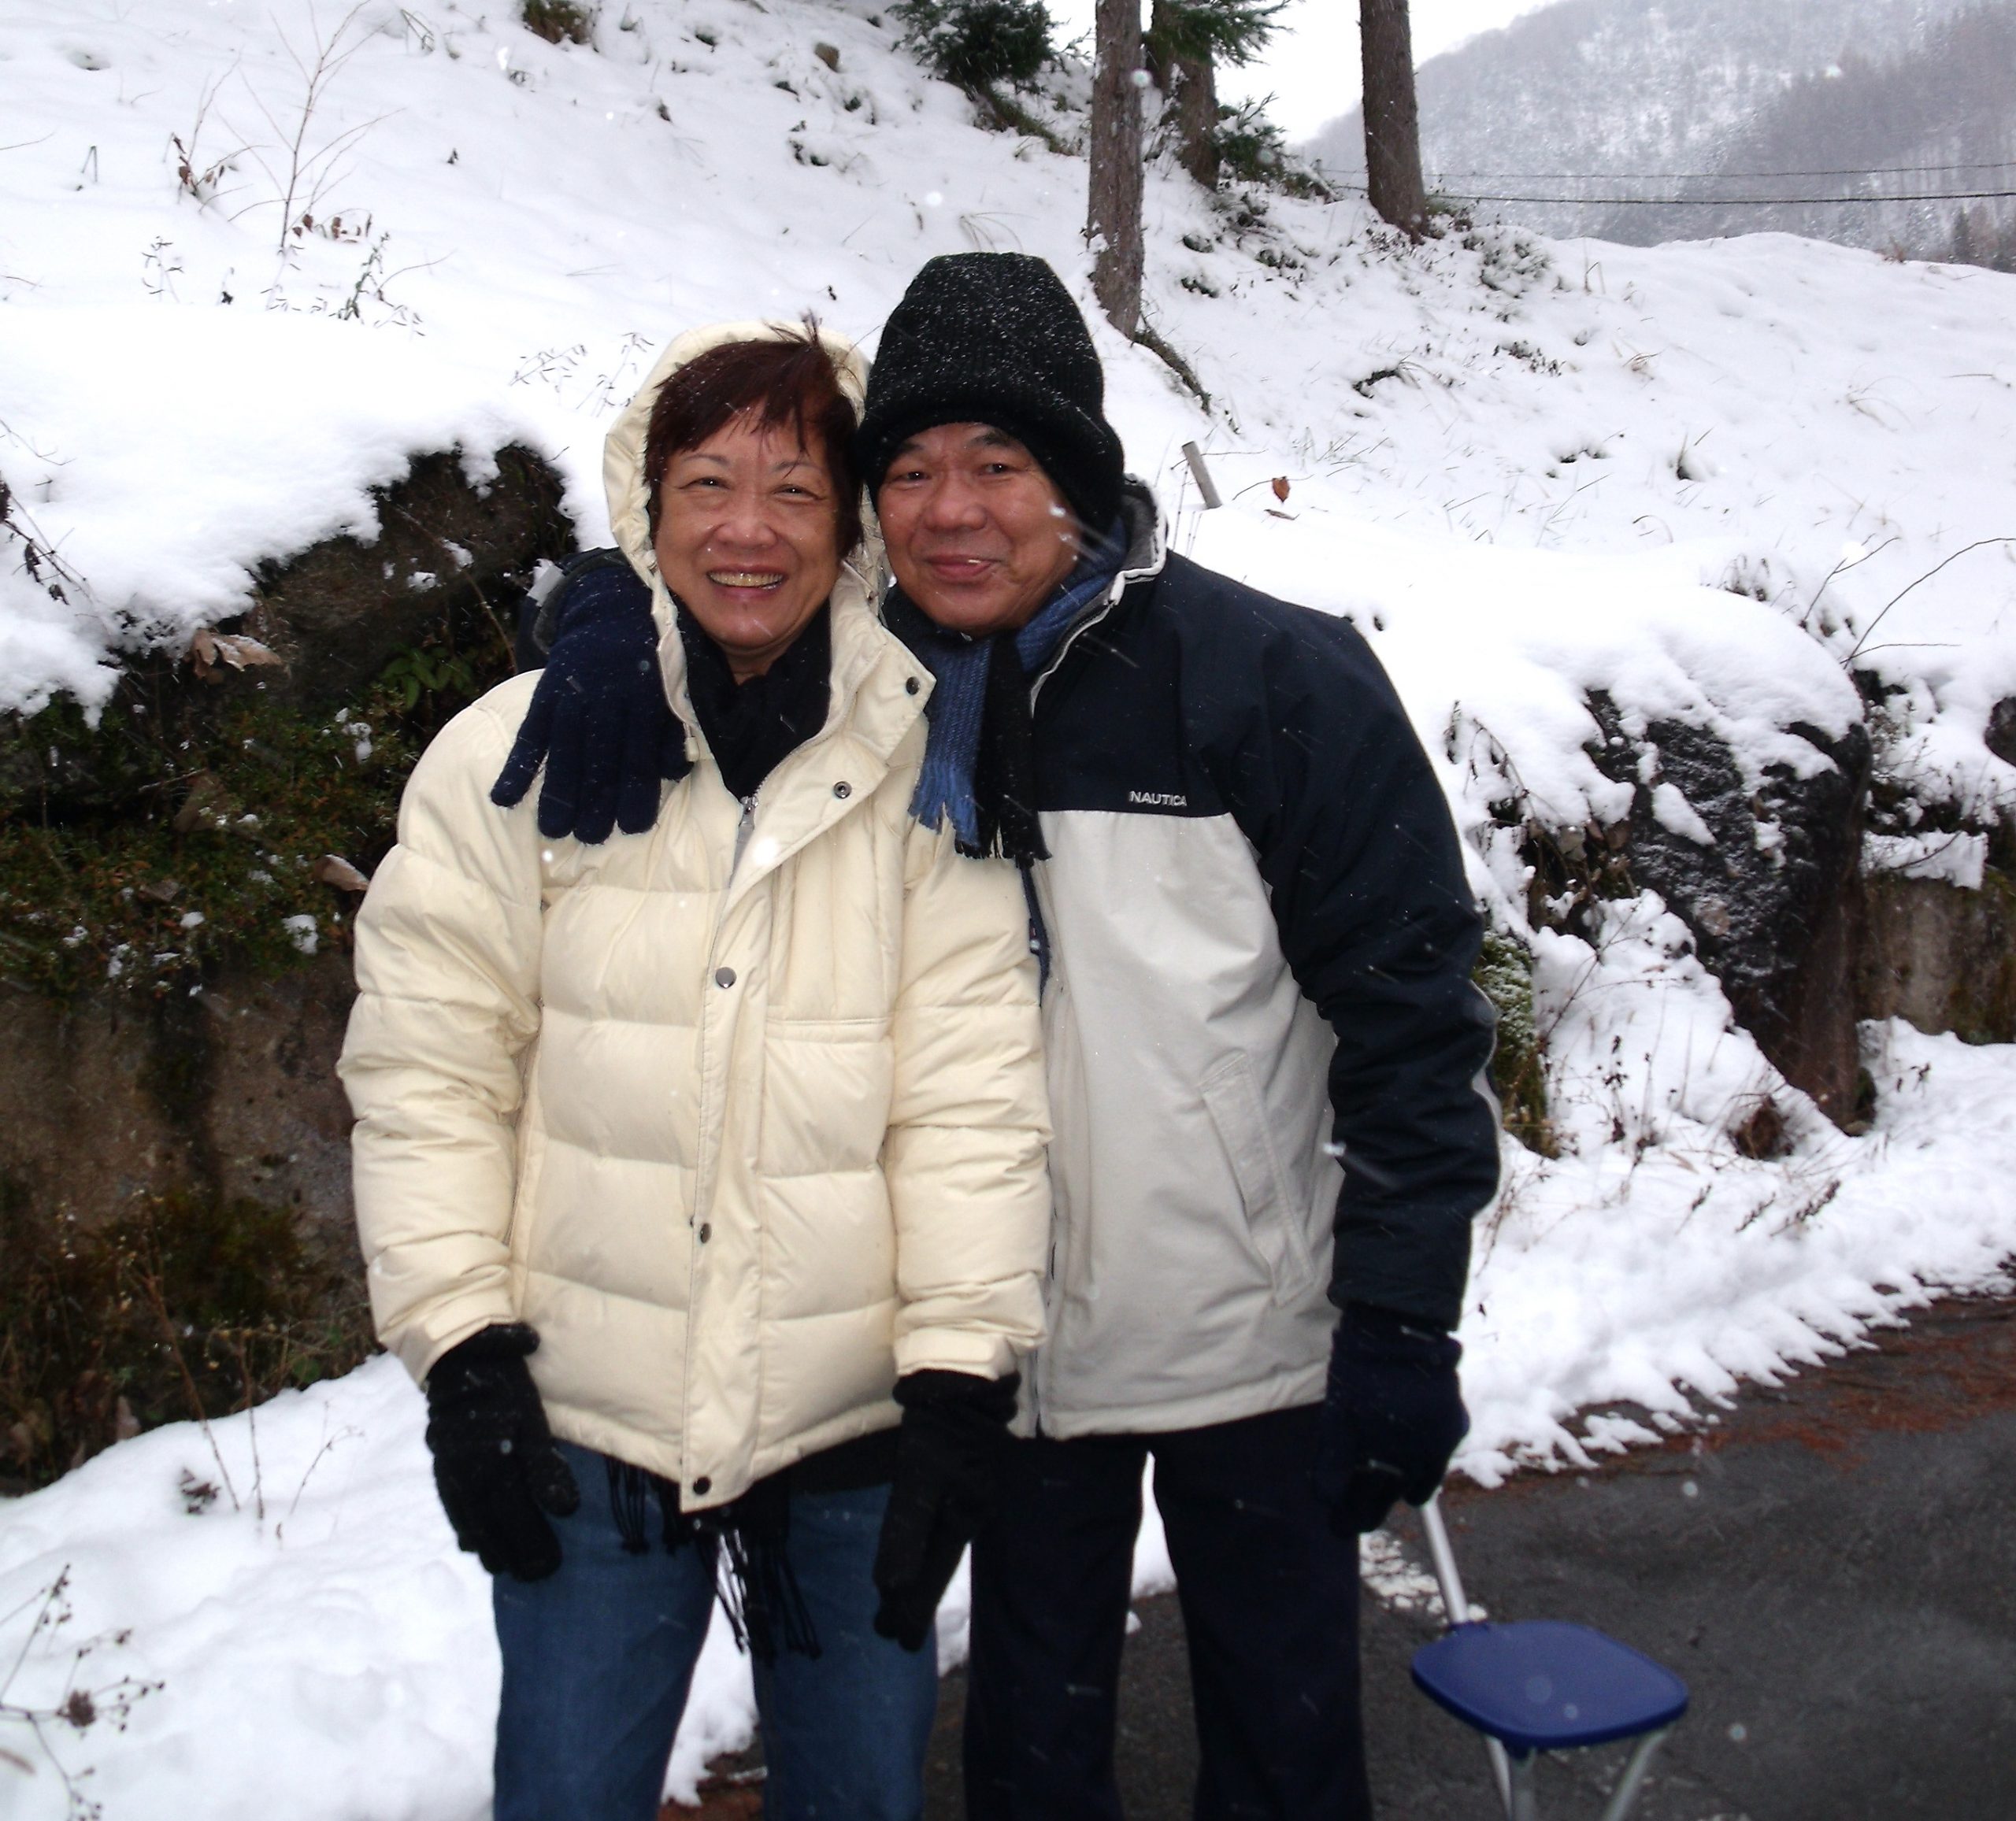 As refreshing as snow was the testimony of miraculous healing from stage 4 lung cancer that Jomay Wan's mother (with her husband) lived to tell.